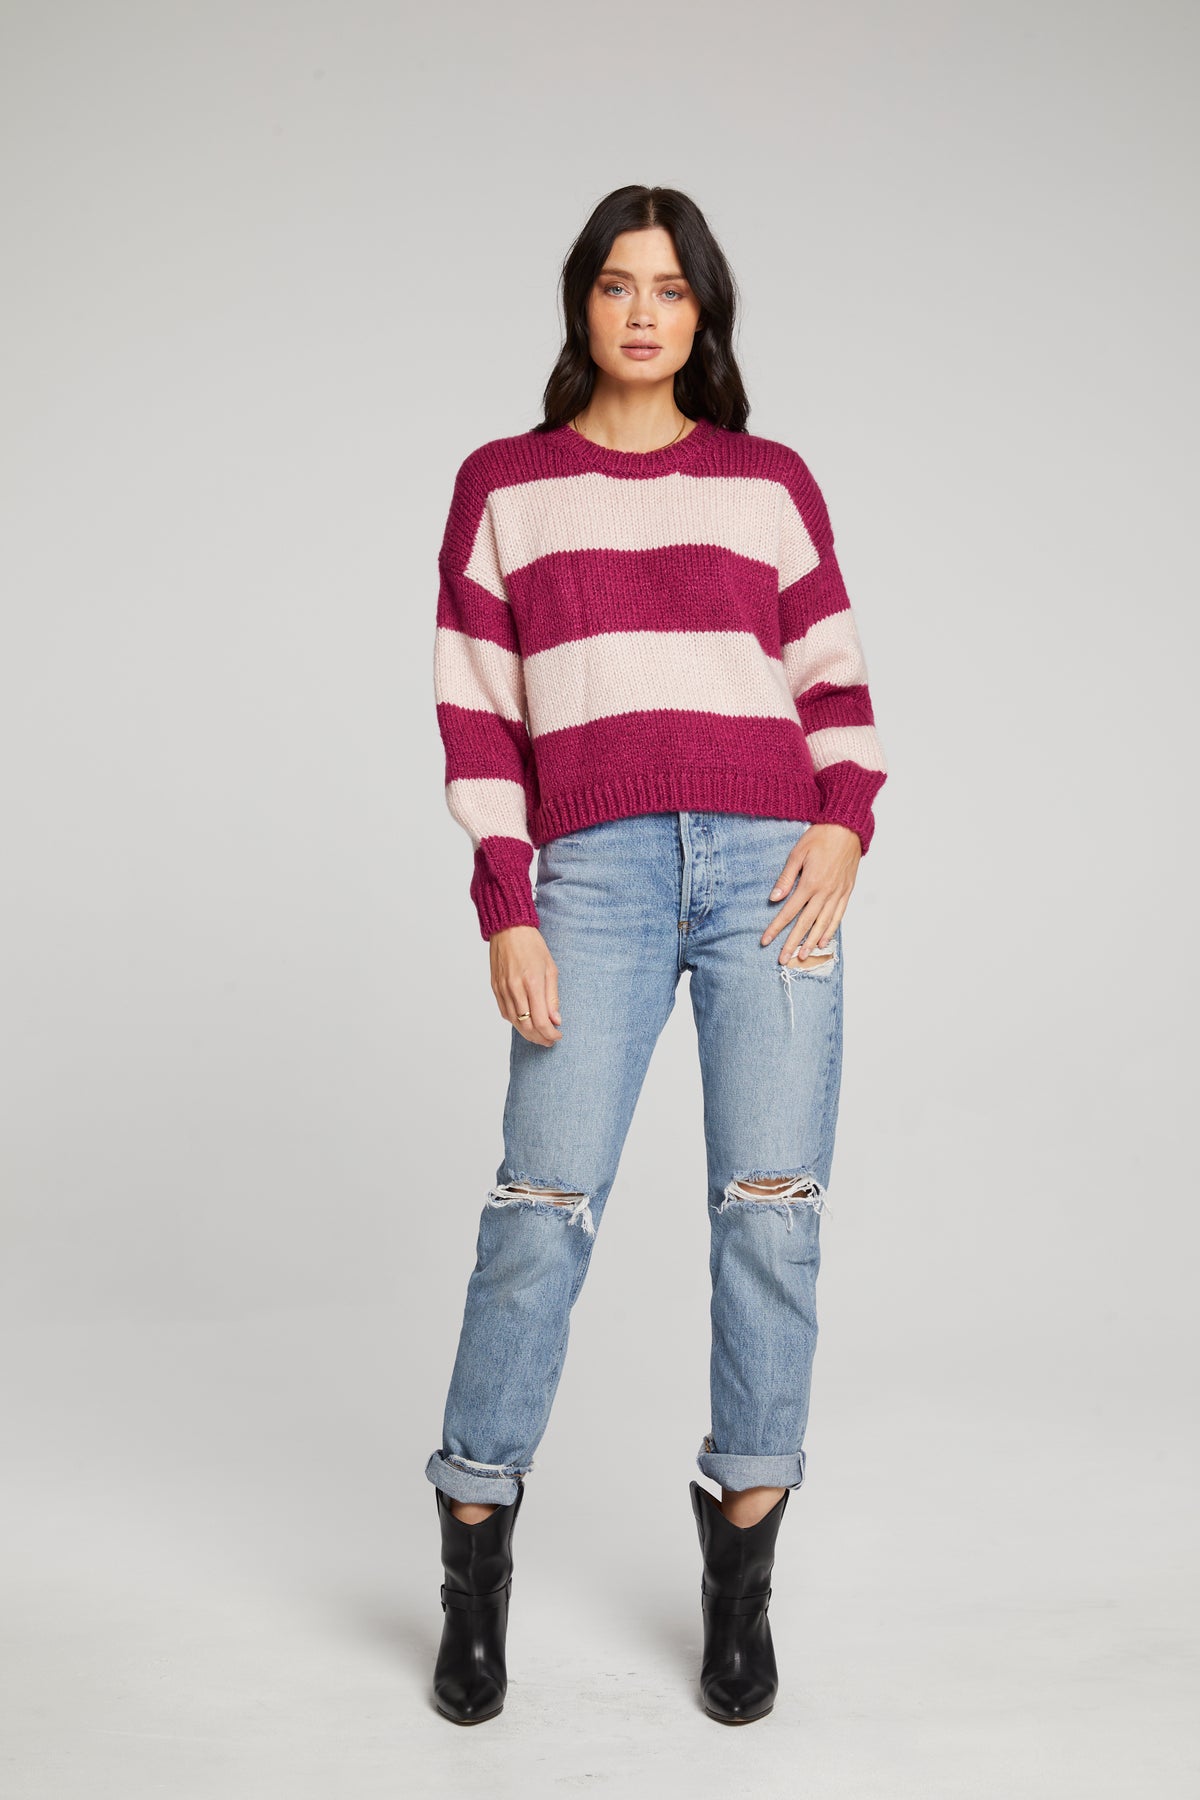 Saltwater Luxe Lexie Sweater